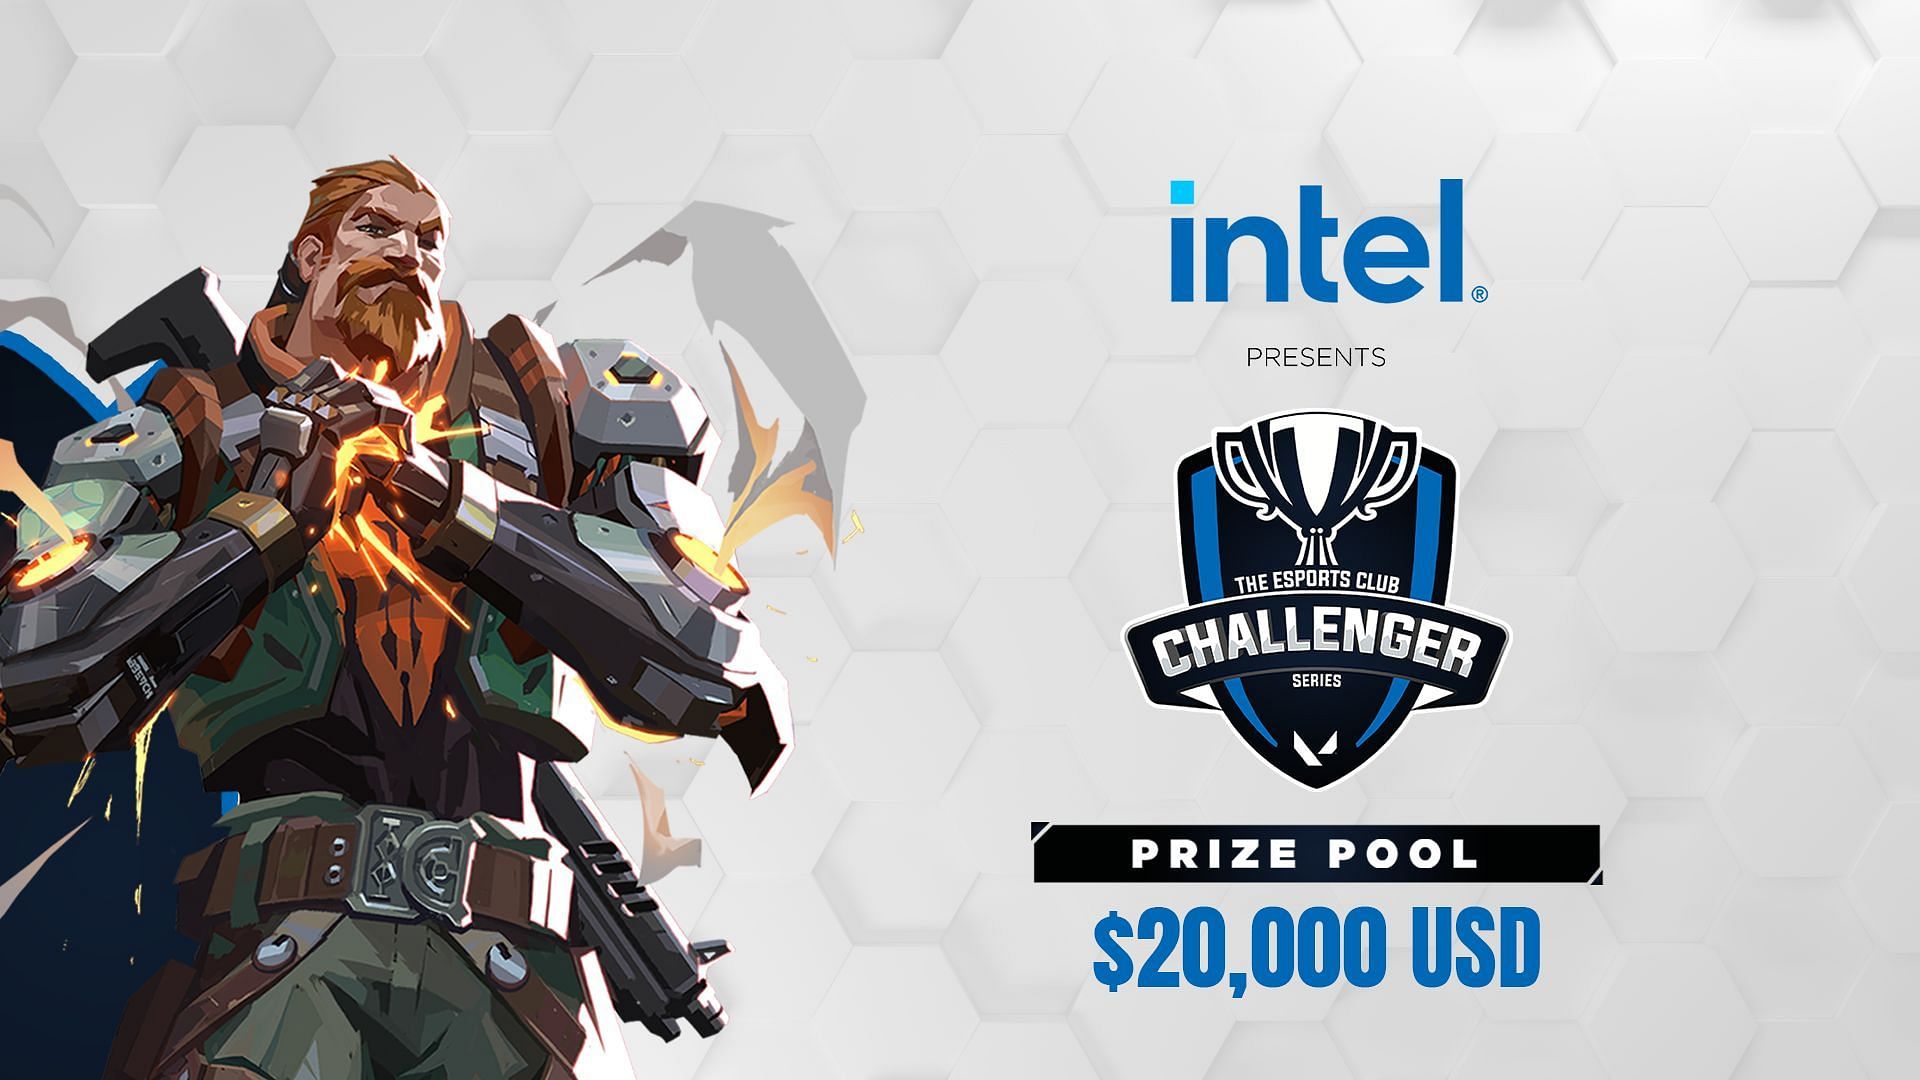 The Challenger Series helped kick off the Valorant craze (Image via The Esports Club